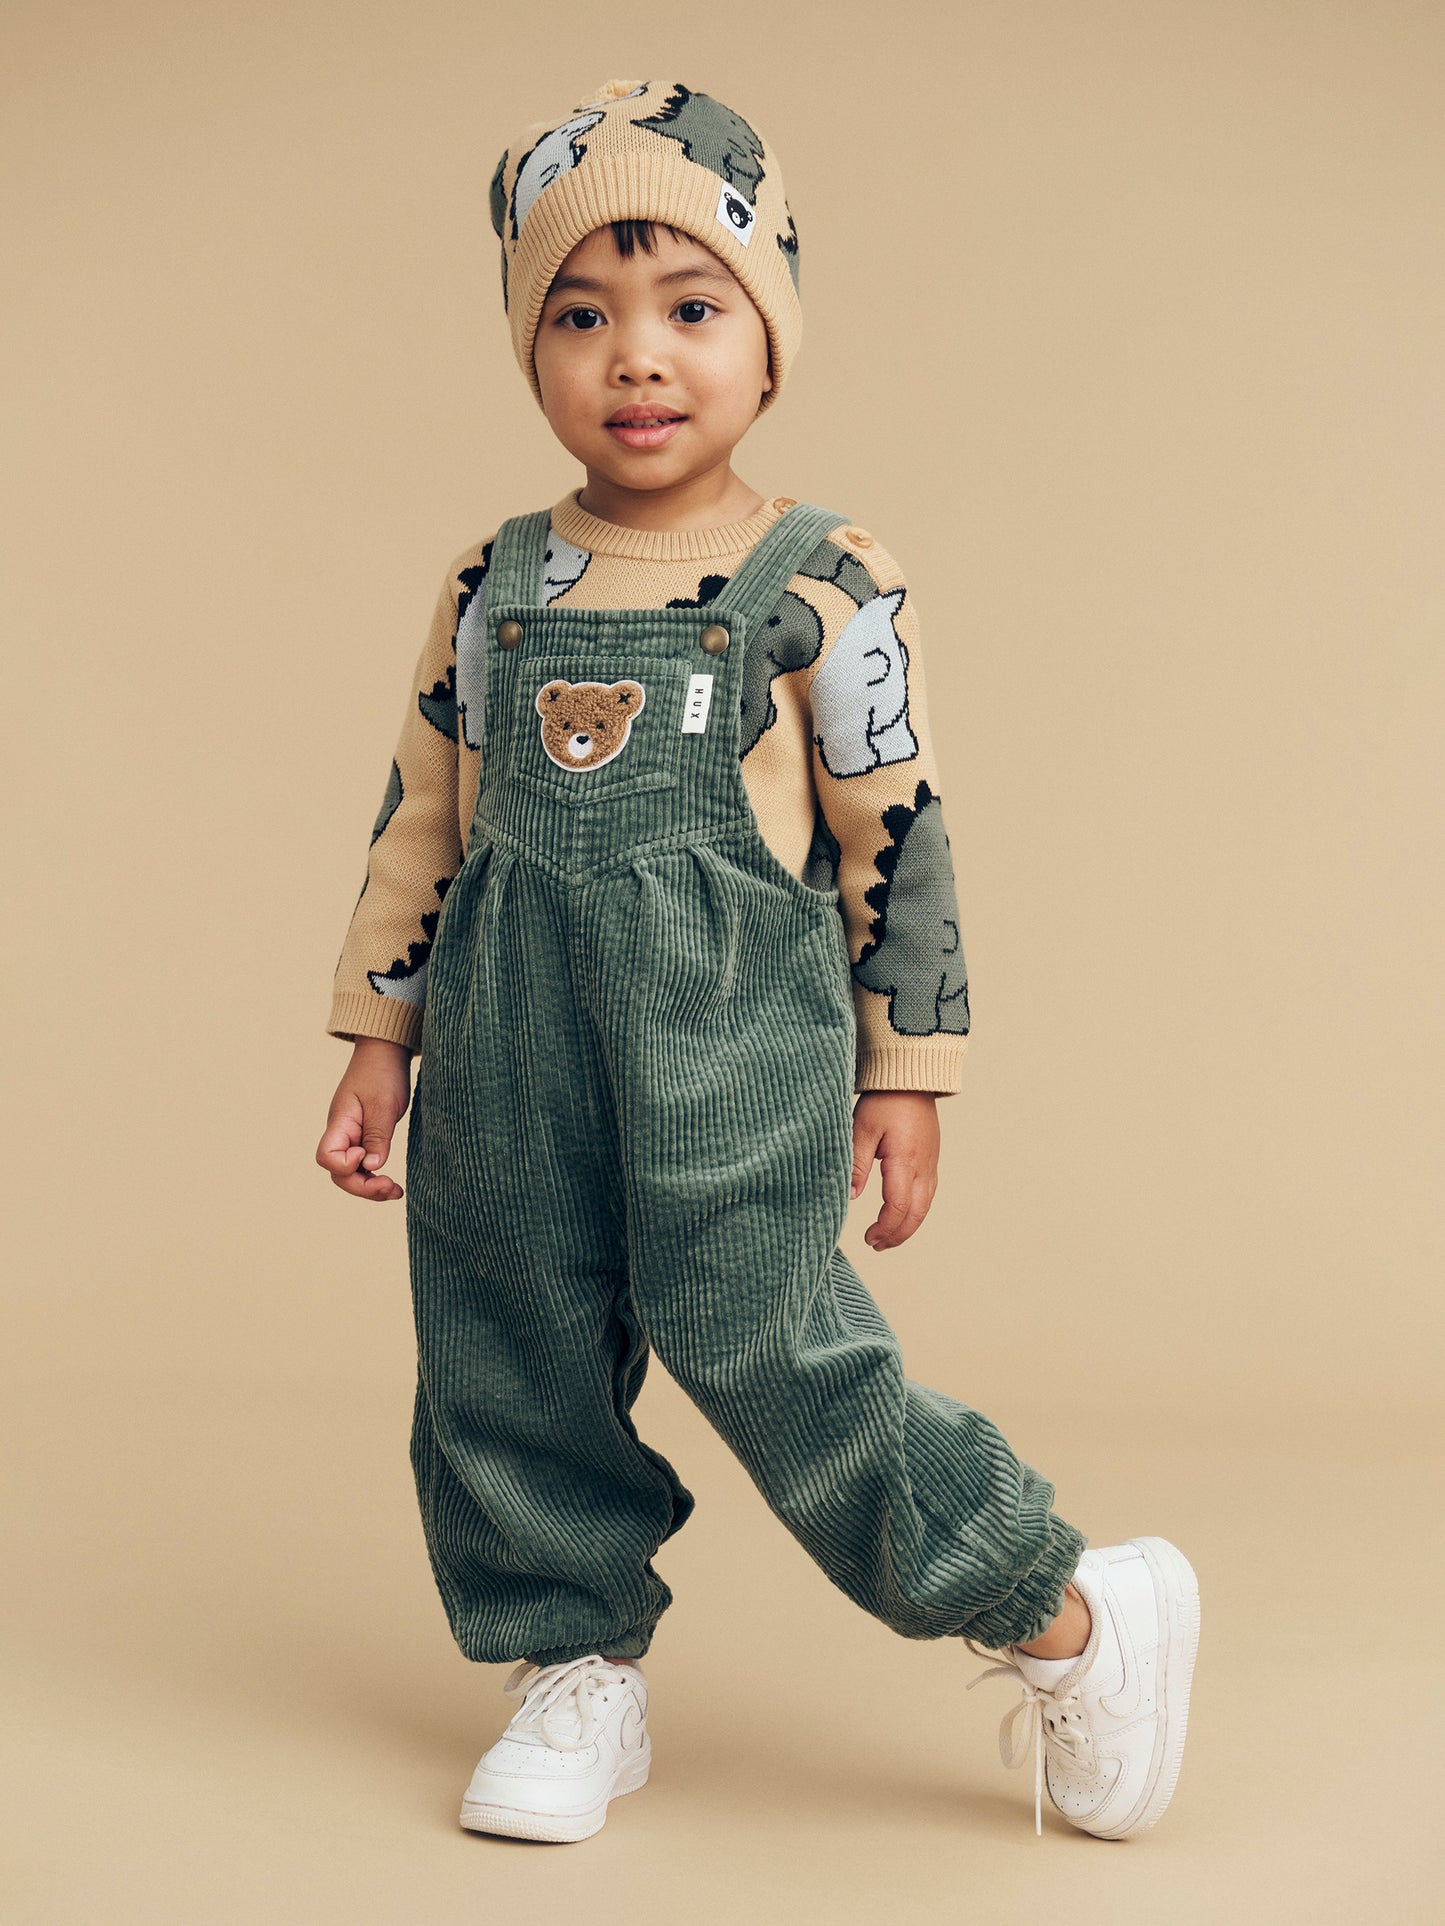 Huxbaby 80'S Cord Overall  Light Spruce